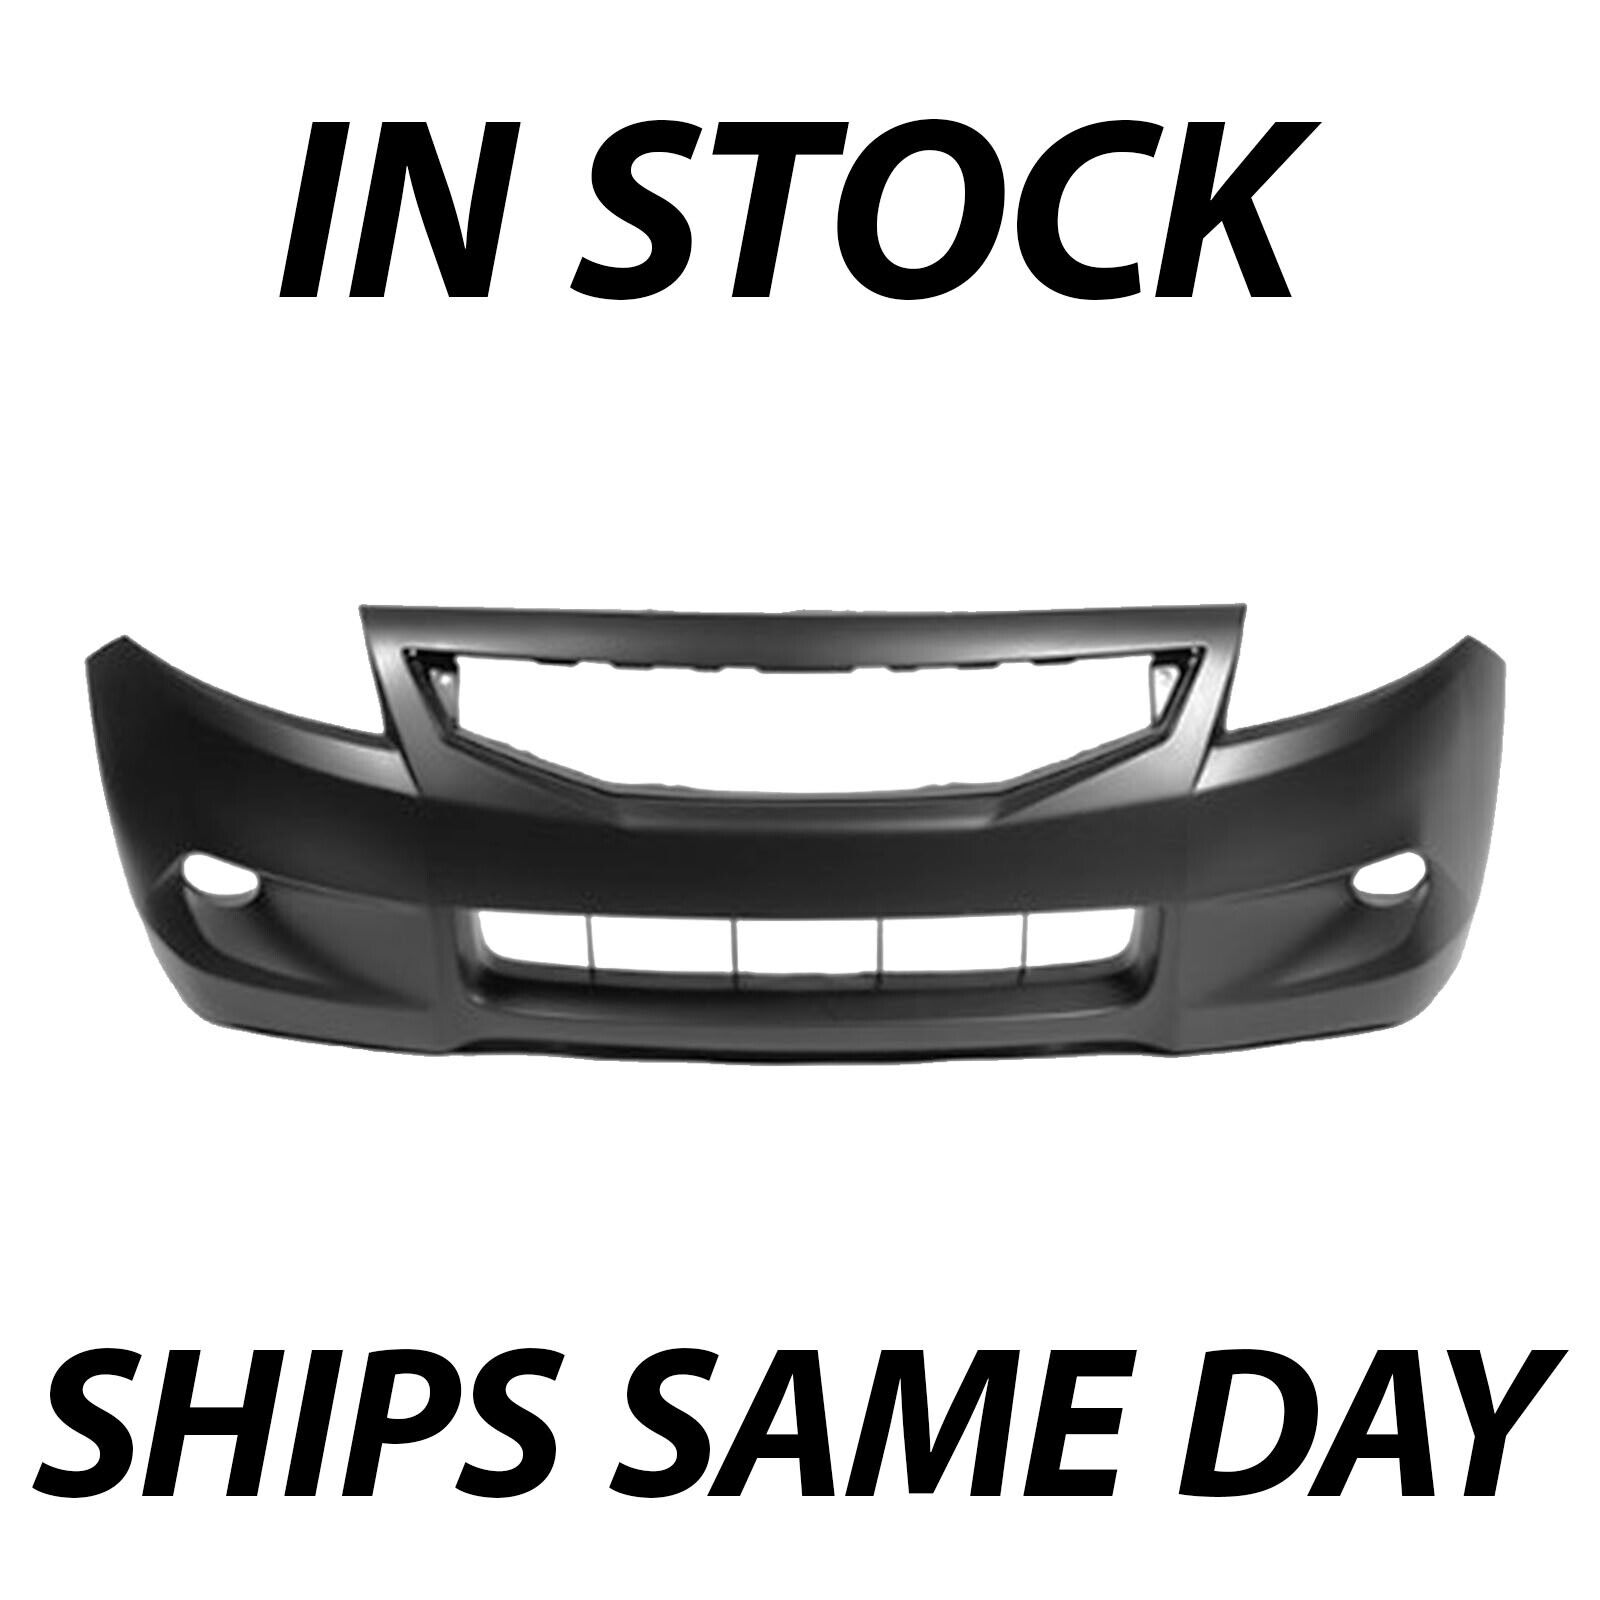 NEW Primered - Front Bumper Cover Fascia for 2008-2010 Honda Accord Coupe 2 Door